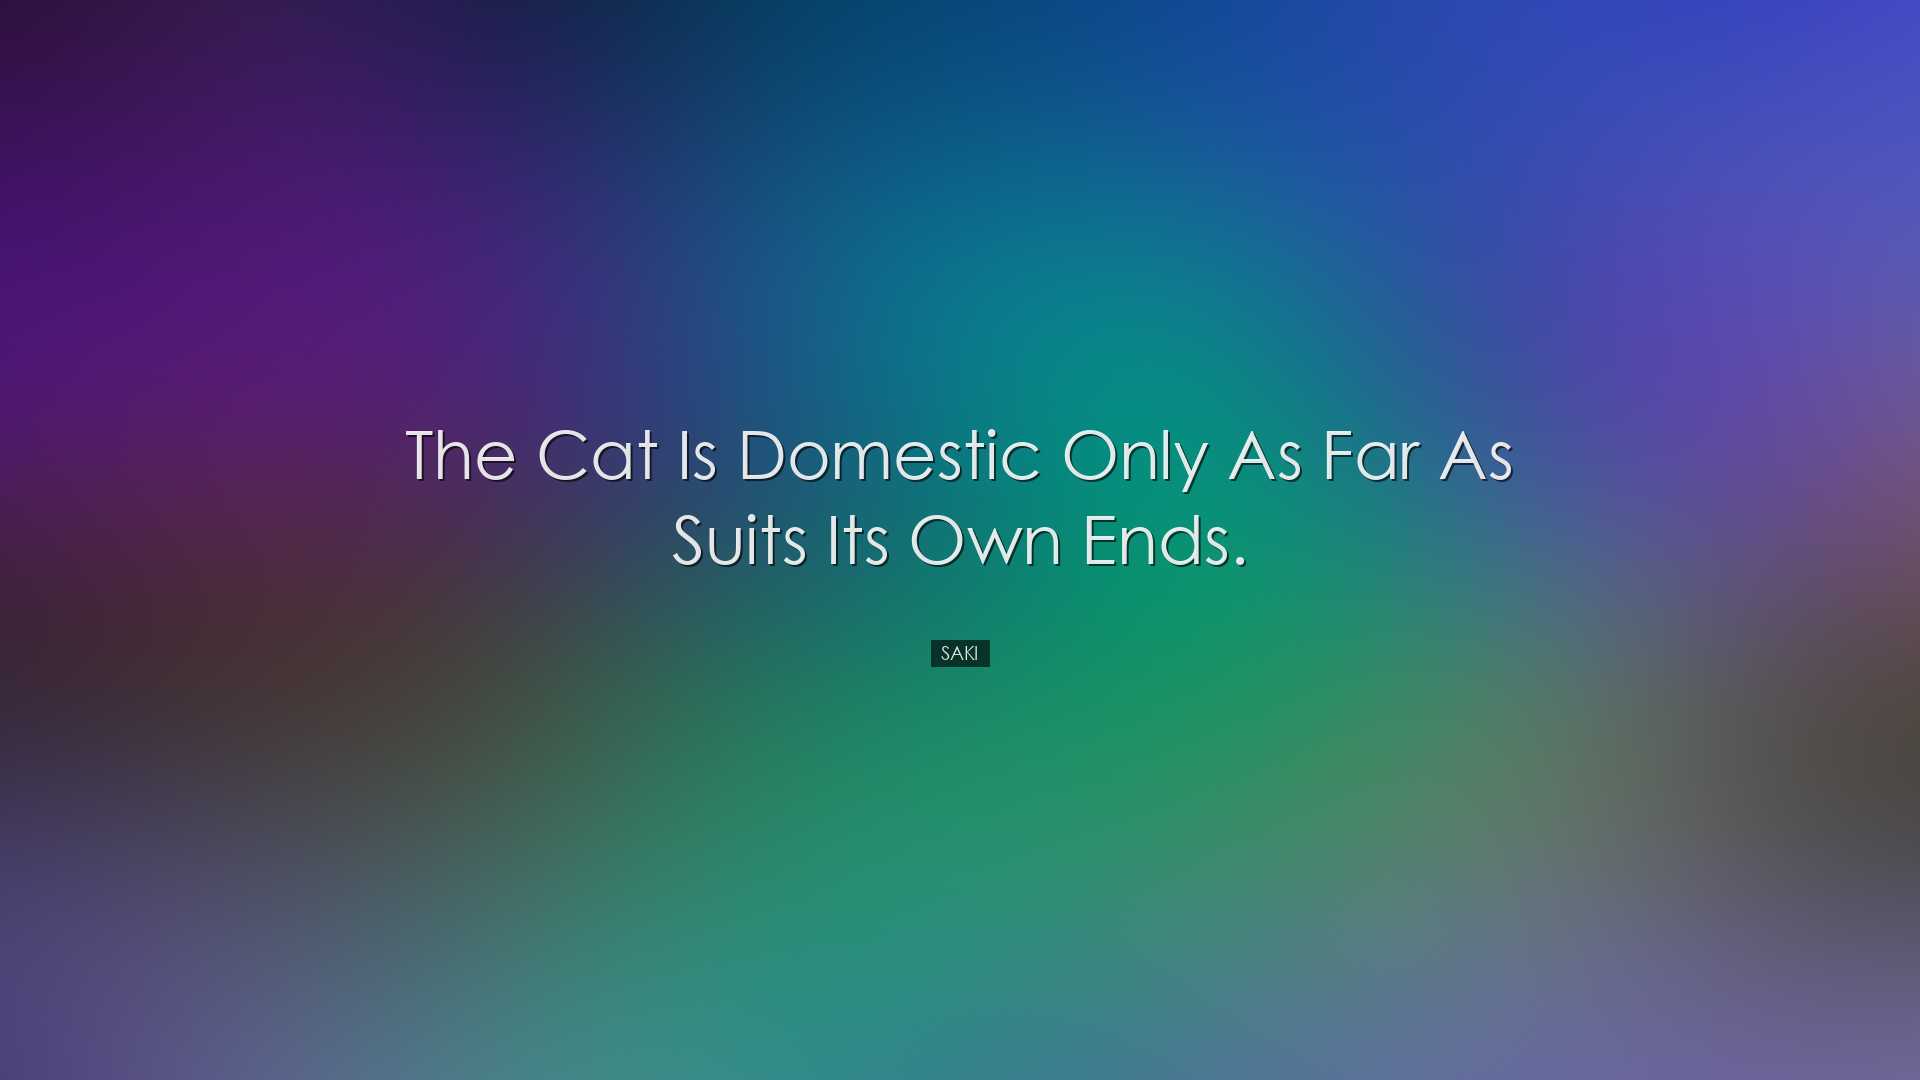 The cat is domestic only as far as suits its own ends. - Saki